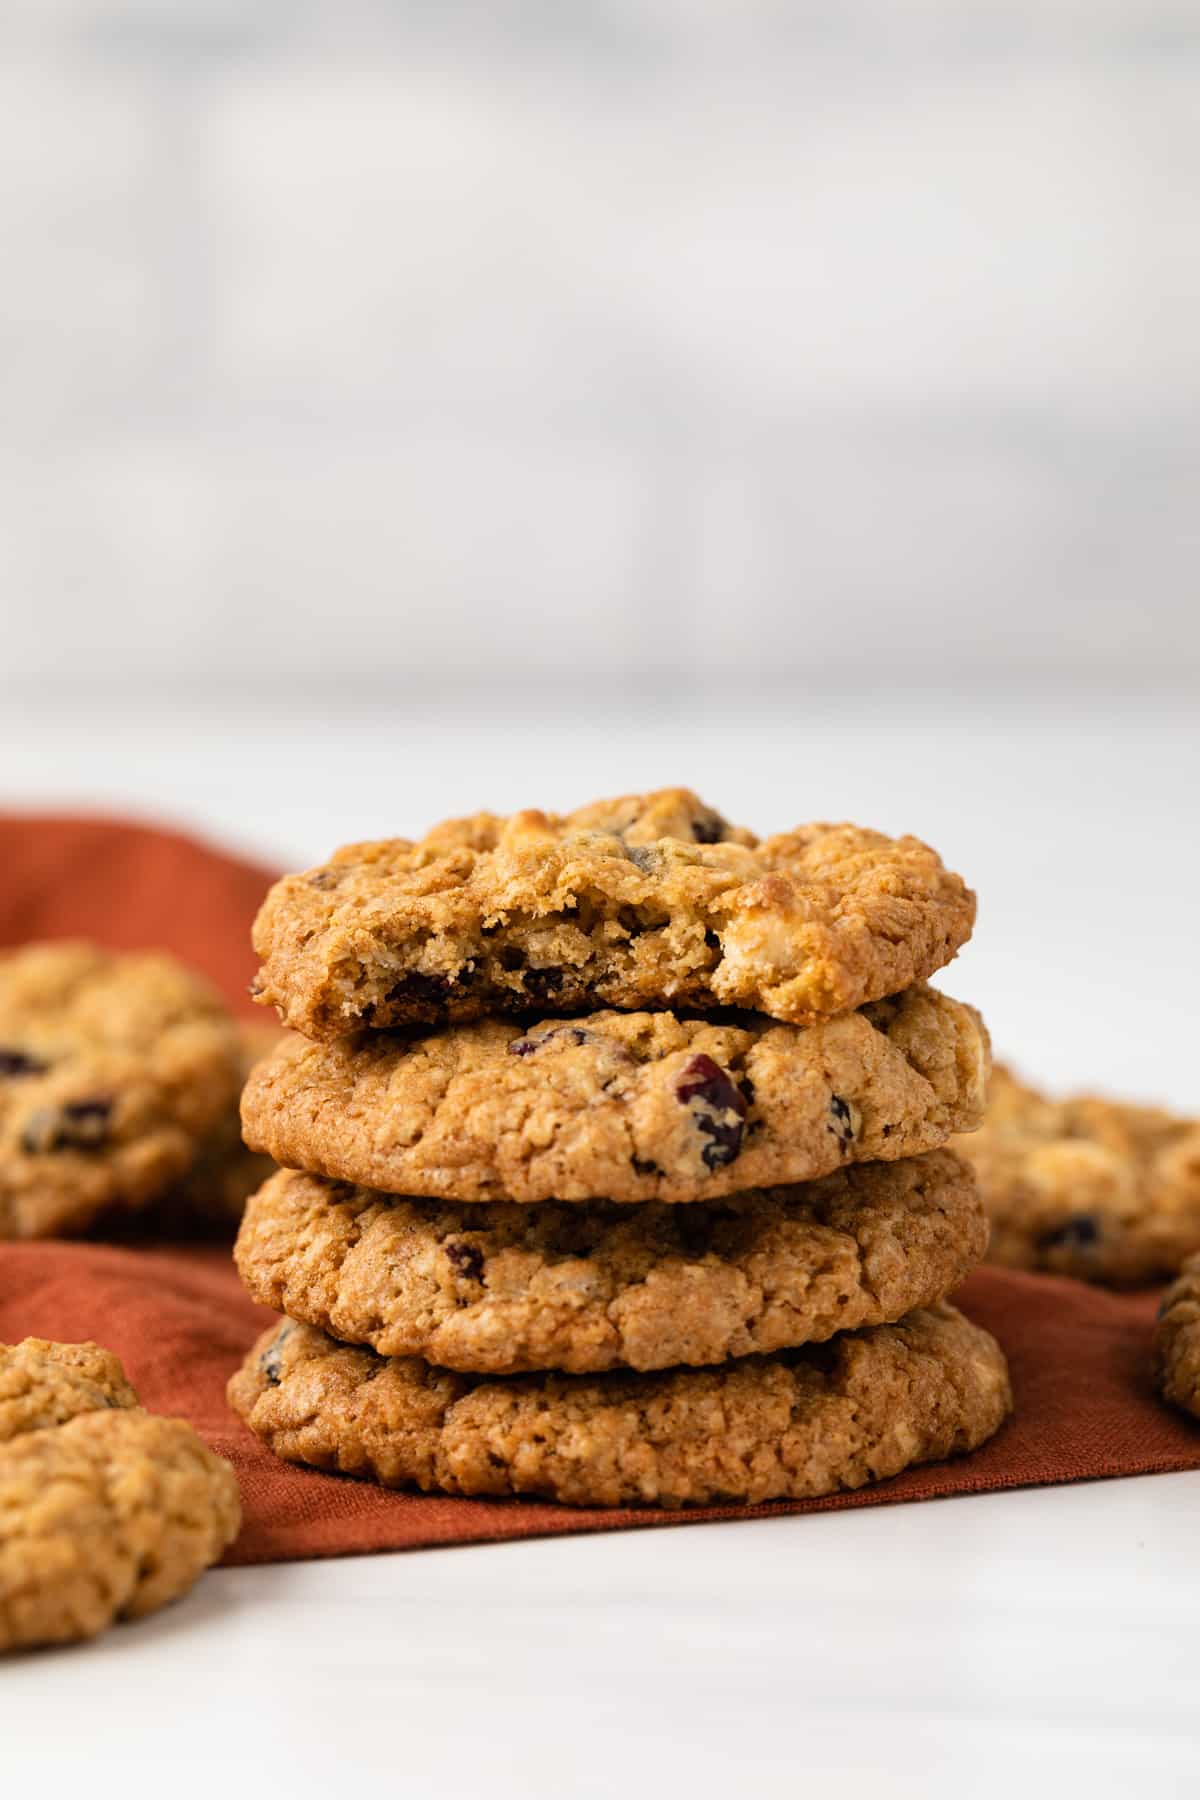 A stack of cranberry white chocolate oatmeal cookies, the top one with a bite missing